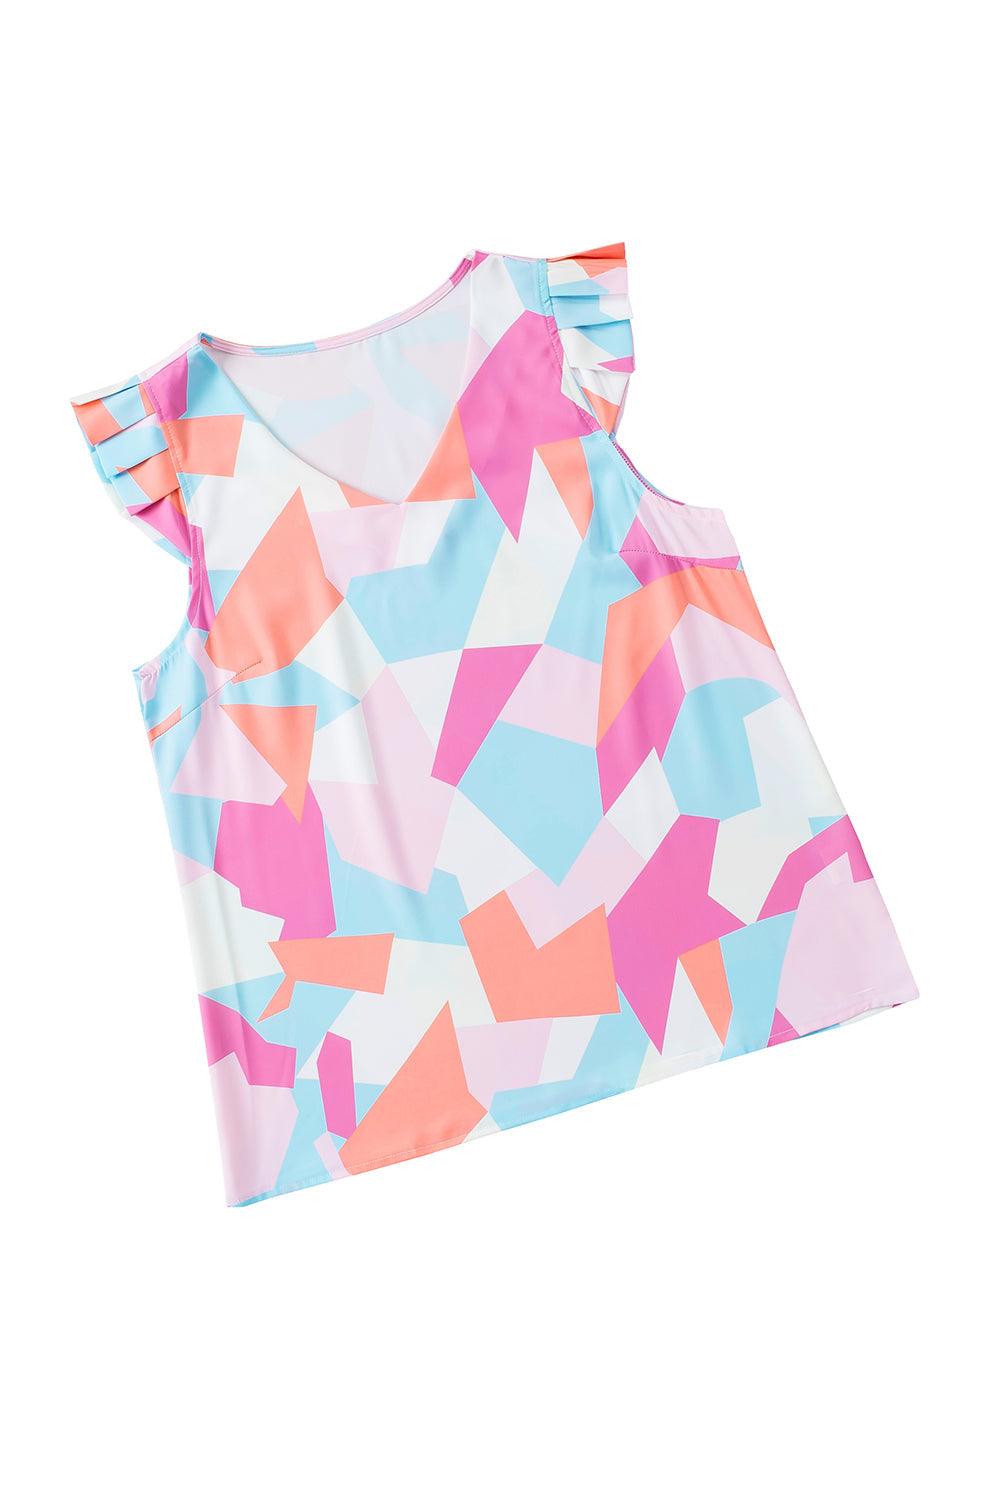 Women's Shirts Multicolor Pastel Print V-Neck Pleated Cap Sleeve Top